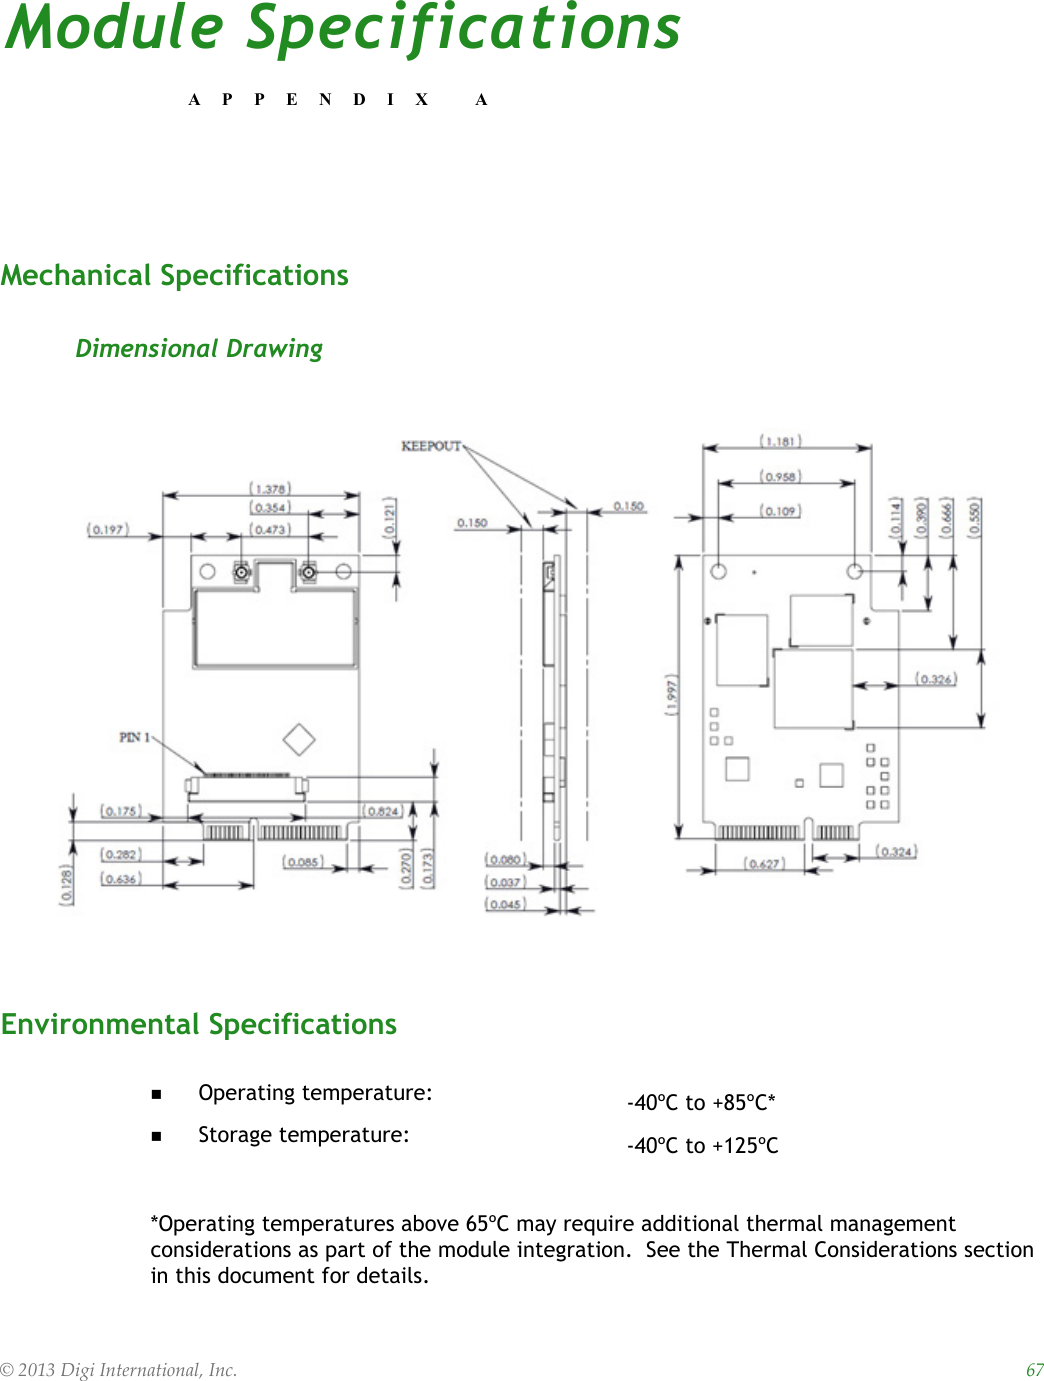 © 2013 Digi International, Inc.    67Module SpecificationsAPPENDIX AMechanical SpecificationsDimensional DrawingEnvironmental Specifications *Operating temperatures above 65ºC may require additional thermal management considerations as part of the module integration.  See the Thermal Considerations section in this document for details.Operating temperature: -40ºC to +85ºC*Storage temperature: -40ºC to +125ºC